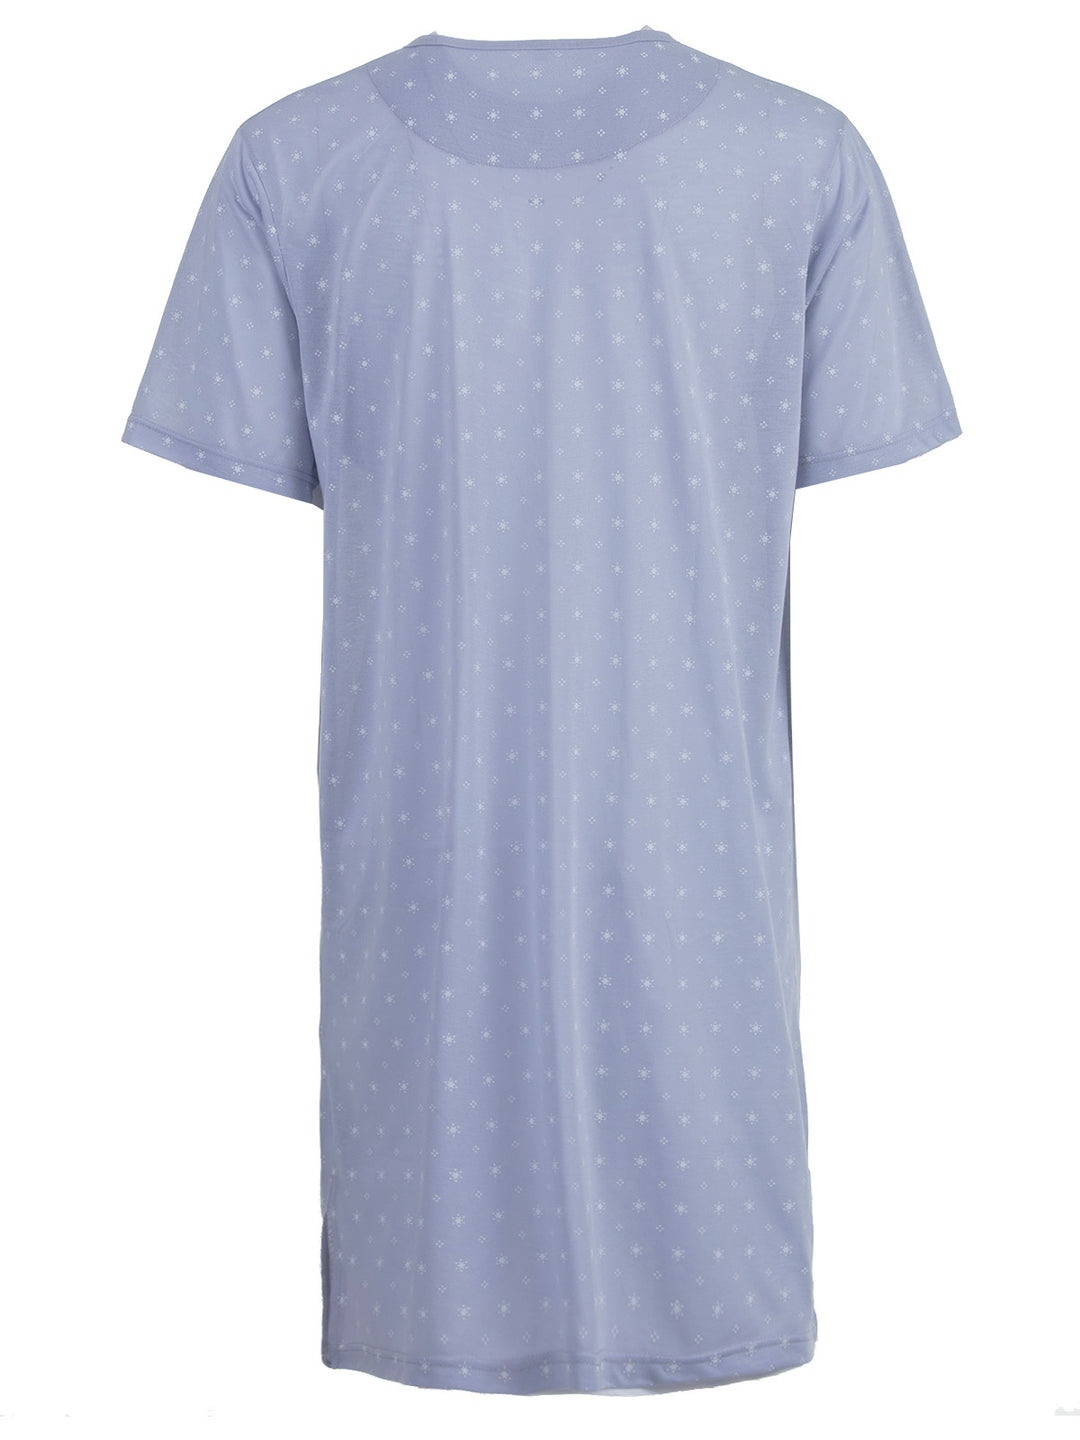 Nightgown short sleeves - sun chest pocket